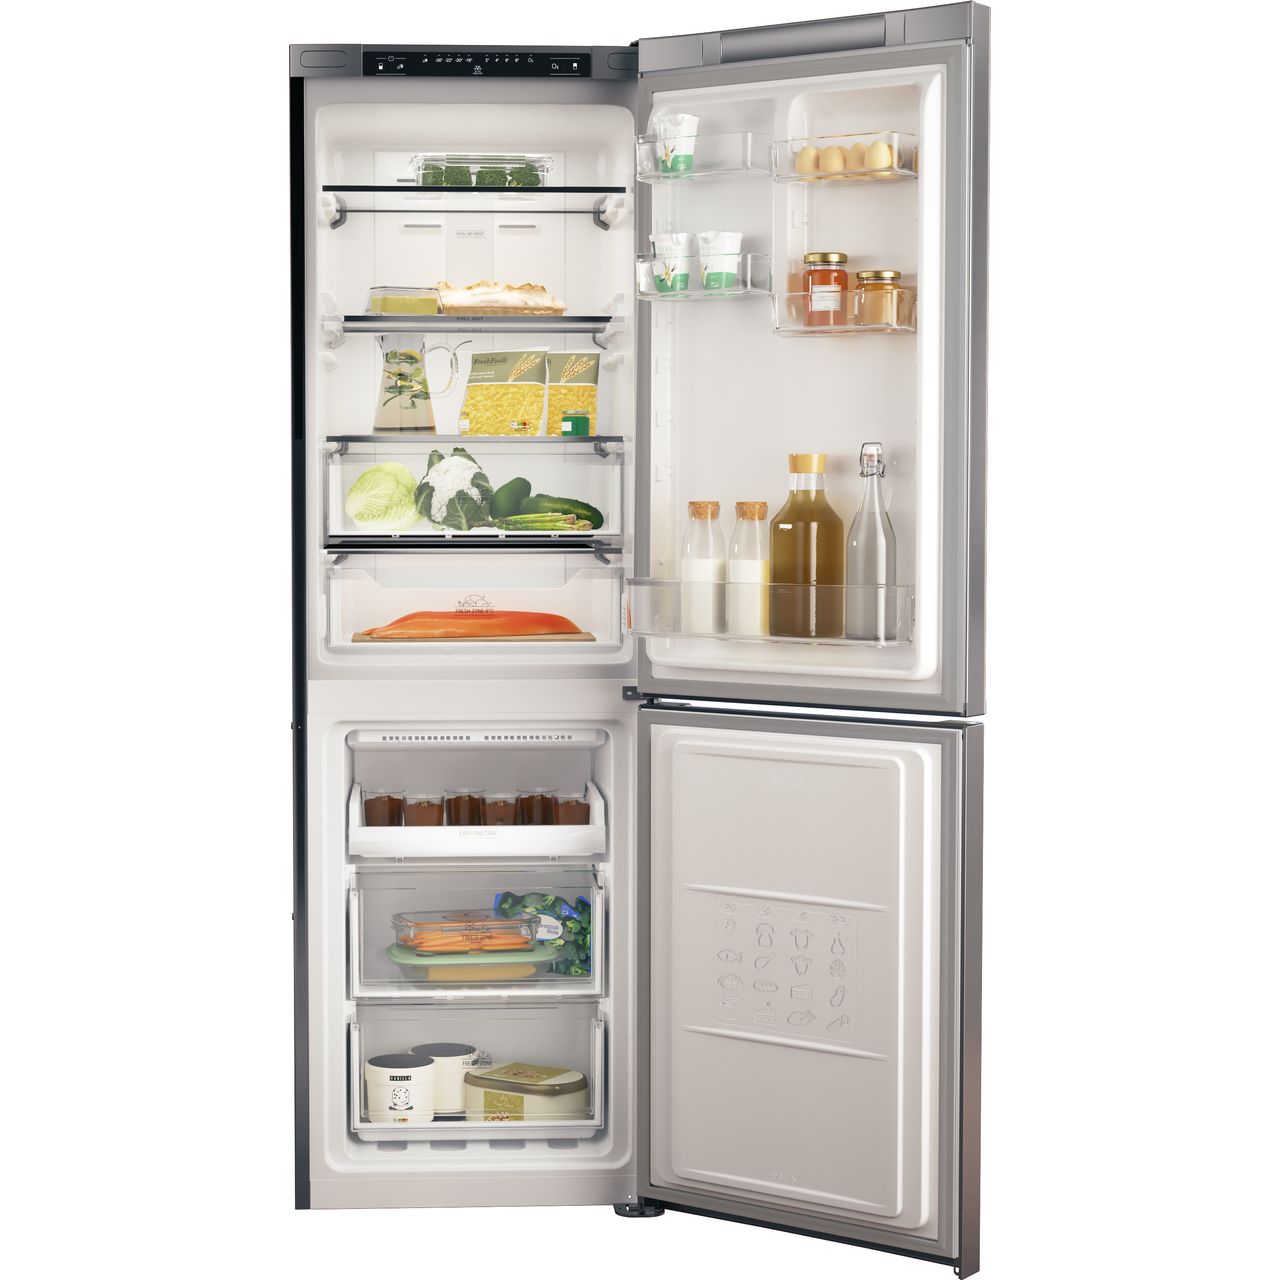 39++ Hotpoint fridge freezer on but not cold ideas in 2021 